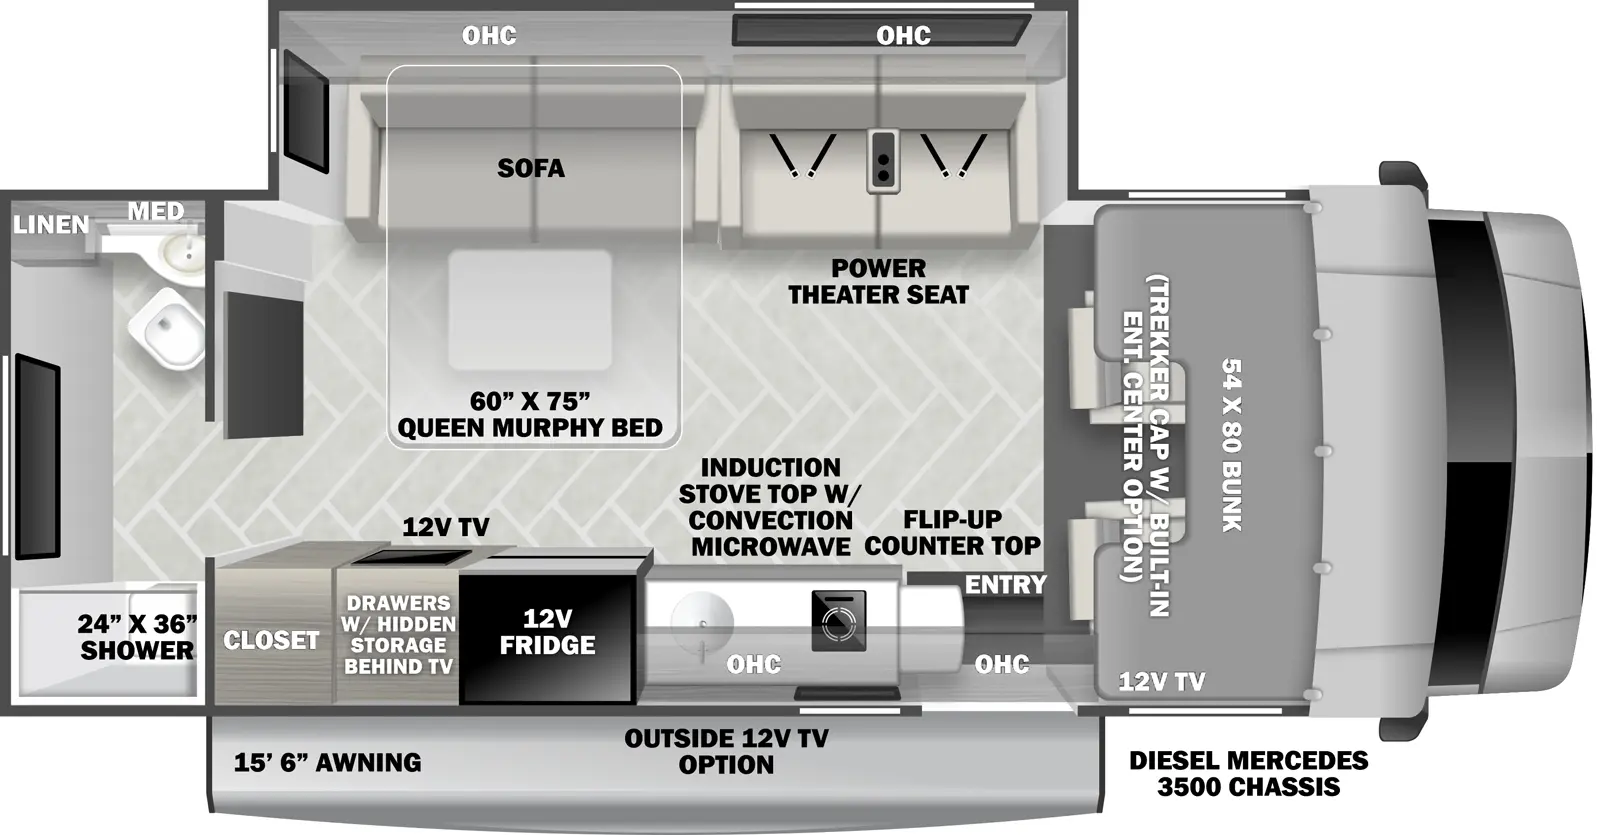 The 2400T is a class c with one slideout and one entry door. Exterior features a 15 foot 6 inch awning, and an optional 12 volt outside TV. Interior layout front to back: front cab with cab over bunk; off-door side slideout with power theater seating, queen murphy bed sofa, and overhead cabinets; door side entry, overhead cabinets, induction stove top with convection microwave, countertop with flip-up countertop extension, sink, 12 volt refrigerator, 12 volt TV with drawers and hidden storage behind, and closet; rear bathroom with linen cabinet. Optional Trekker cap with built-in entertainment center in place of cab over bunk.